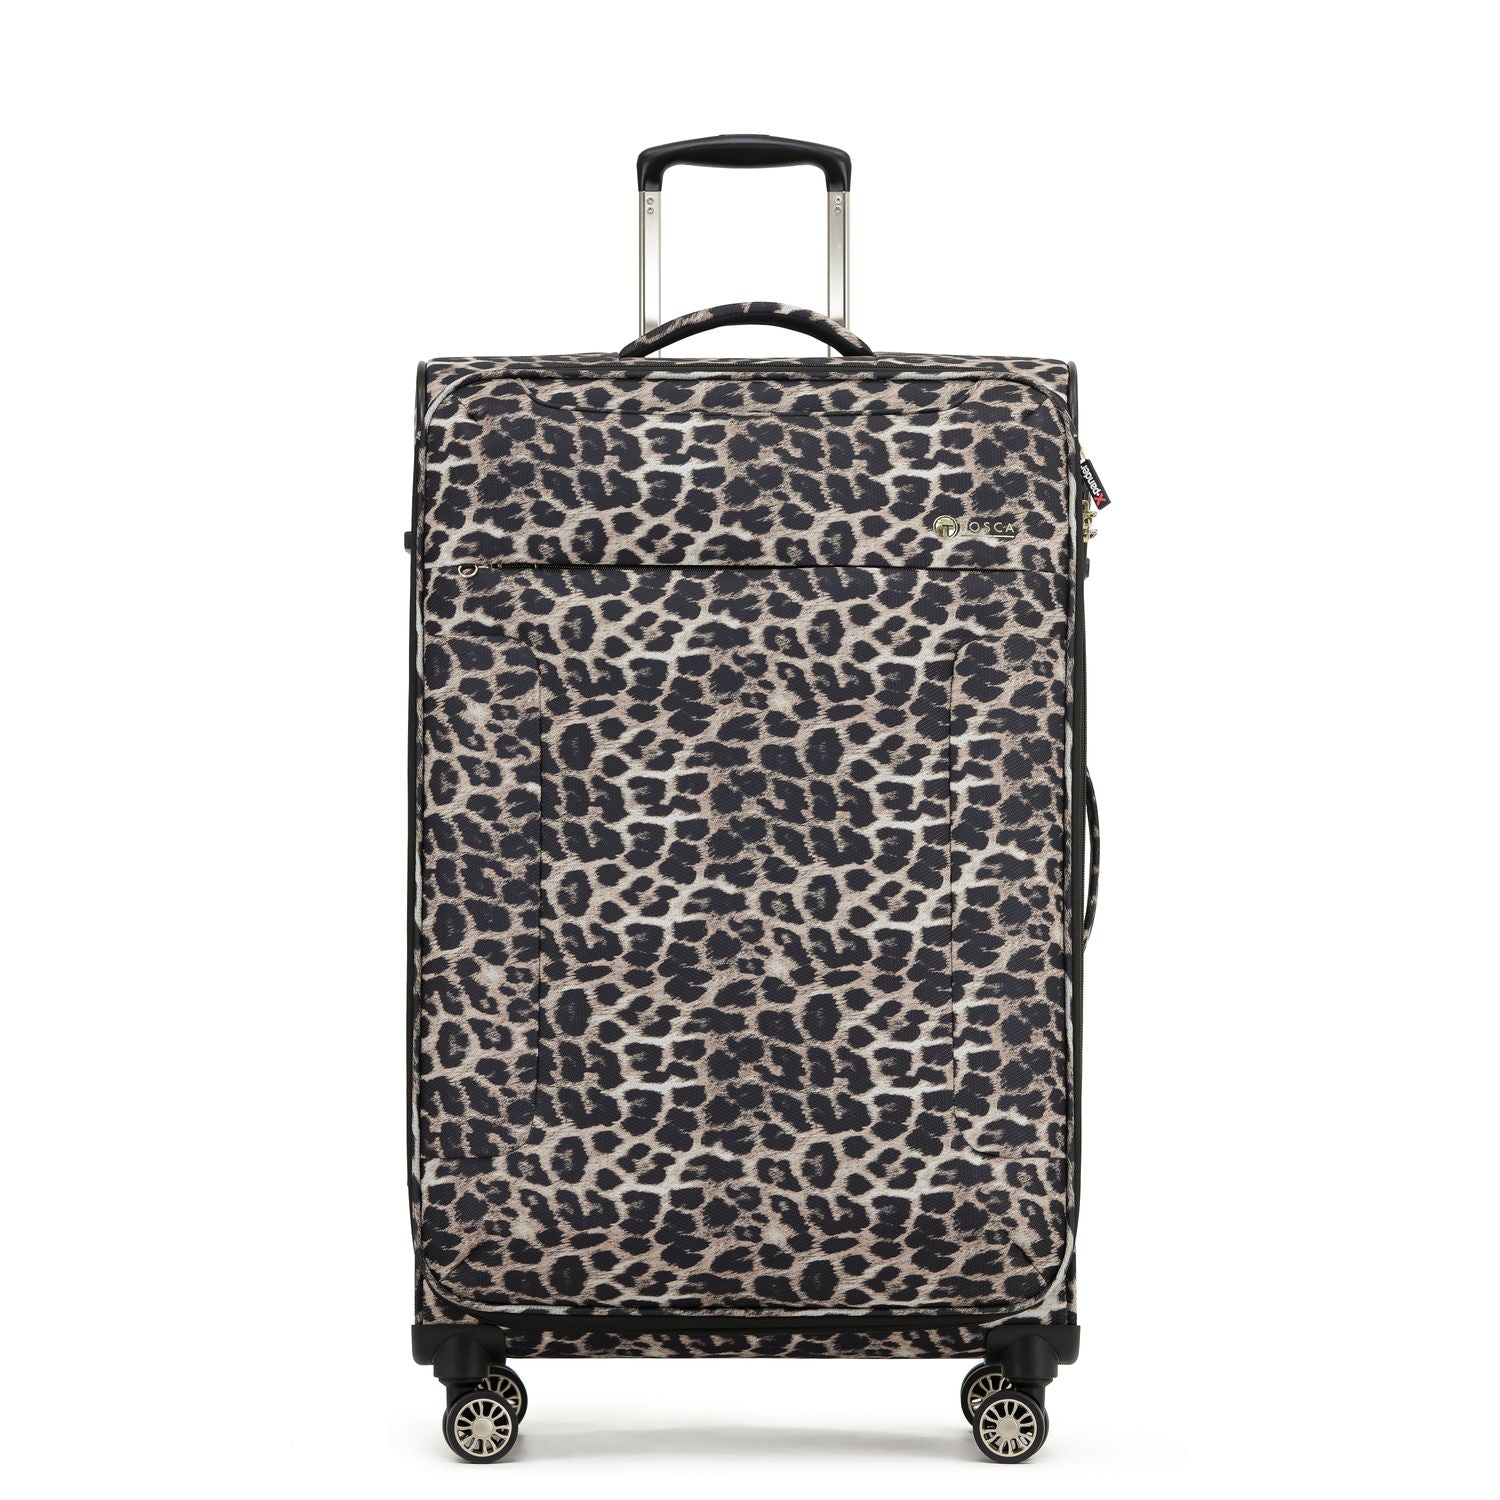 Tosca - So Lite 3.0 29in Large 4 Wheel Soft Suitcase - Leopard-1